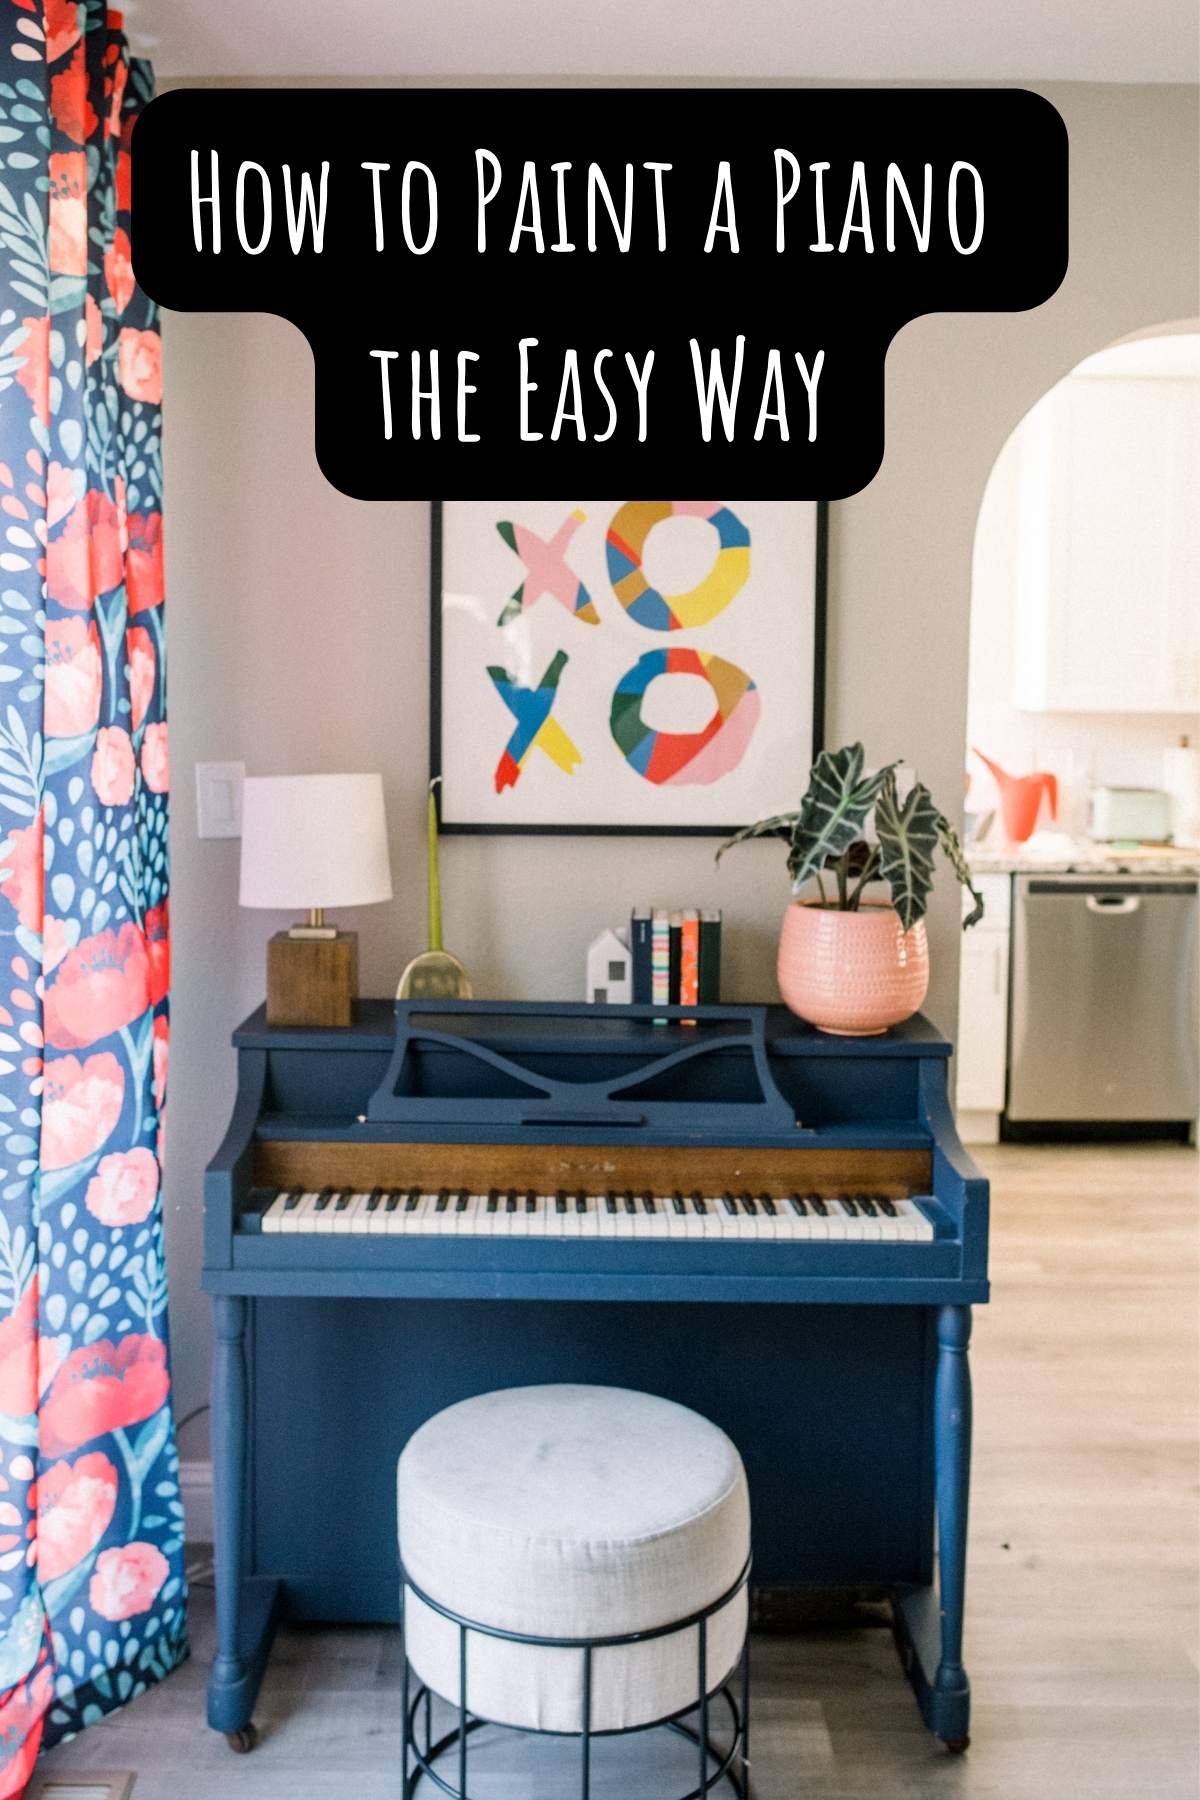 How to paint a piano the easy way